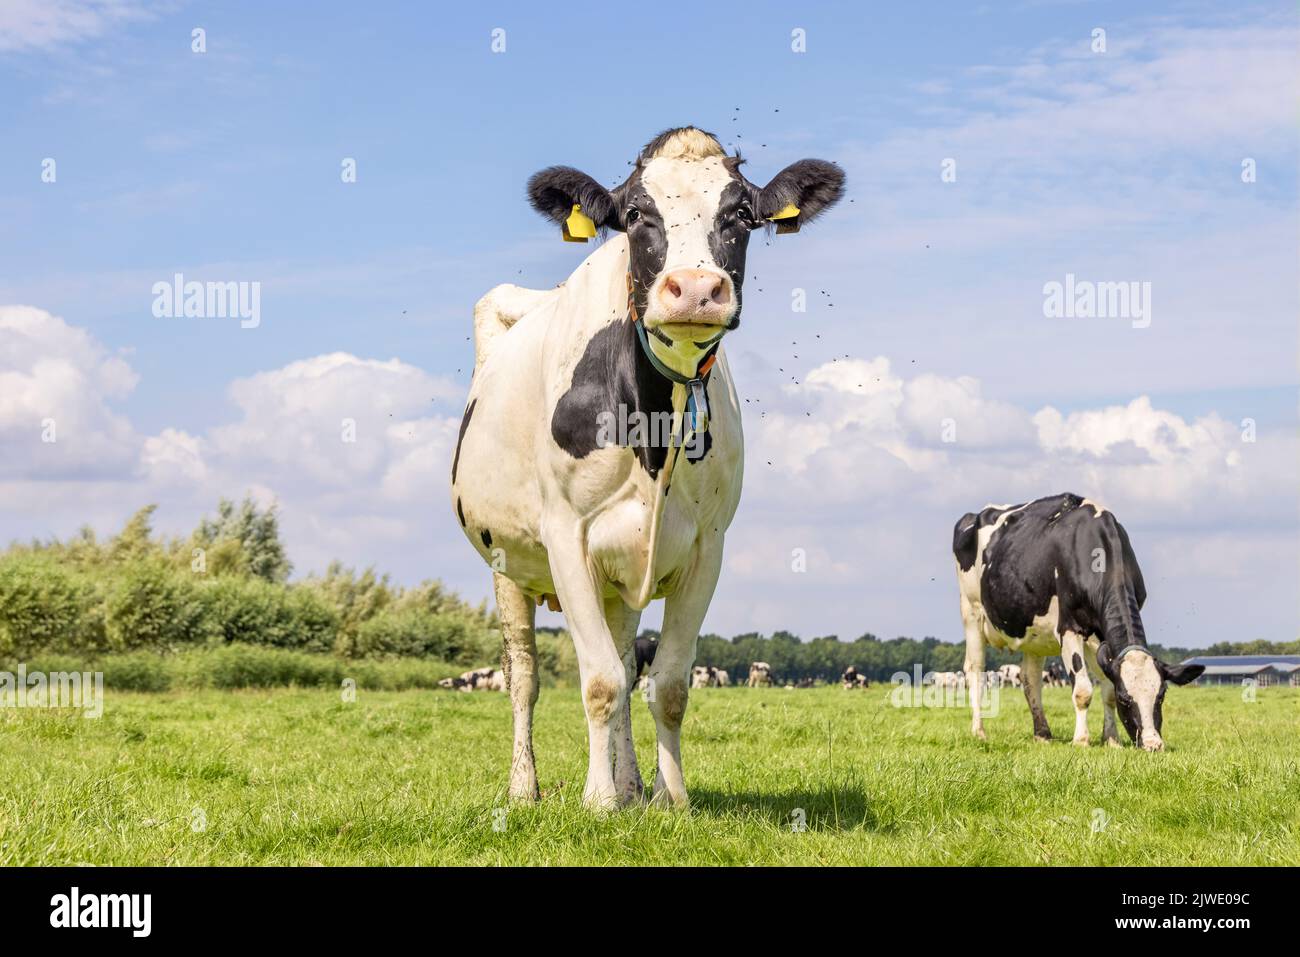 Cow and flies, buzzing and flying a plague, cute and calm bovine, large pink nose and friendly expression Stock Photo